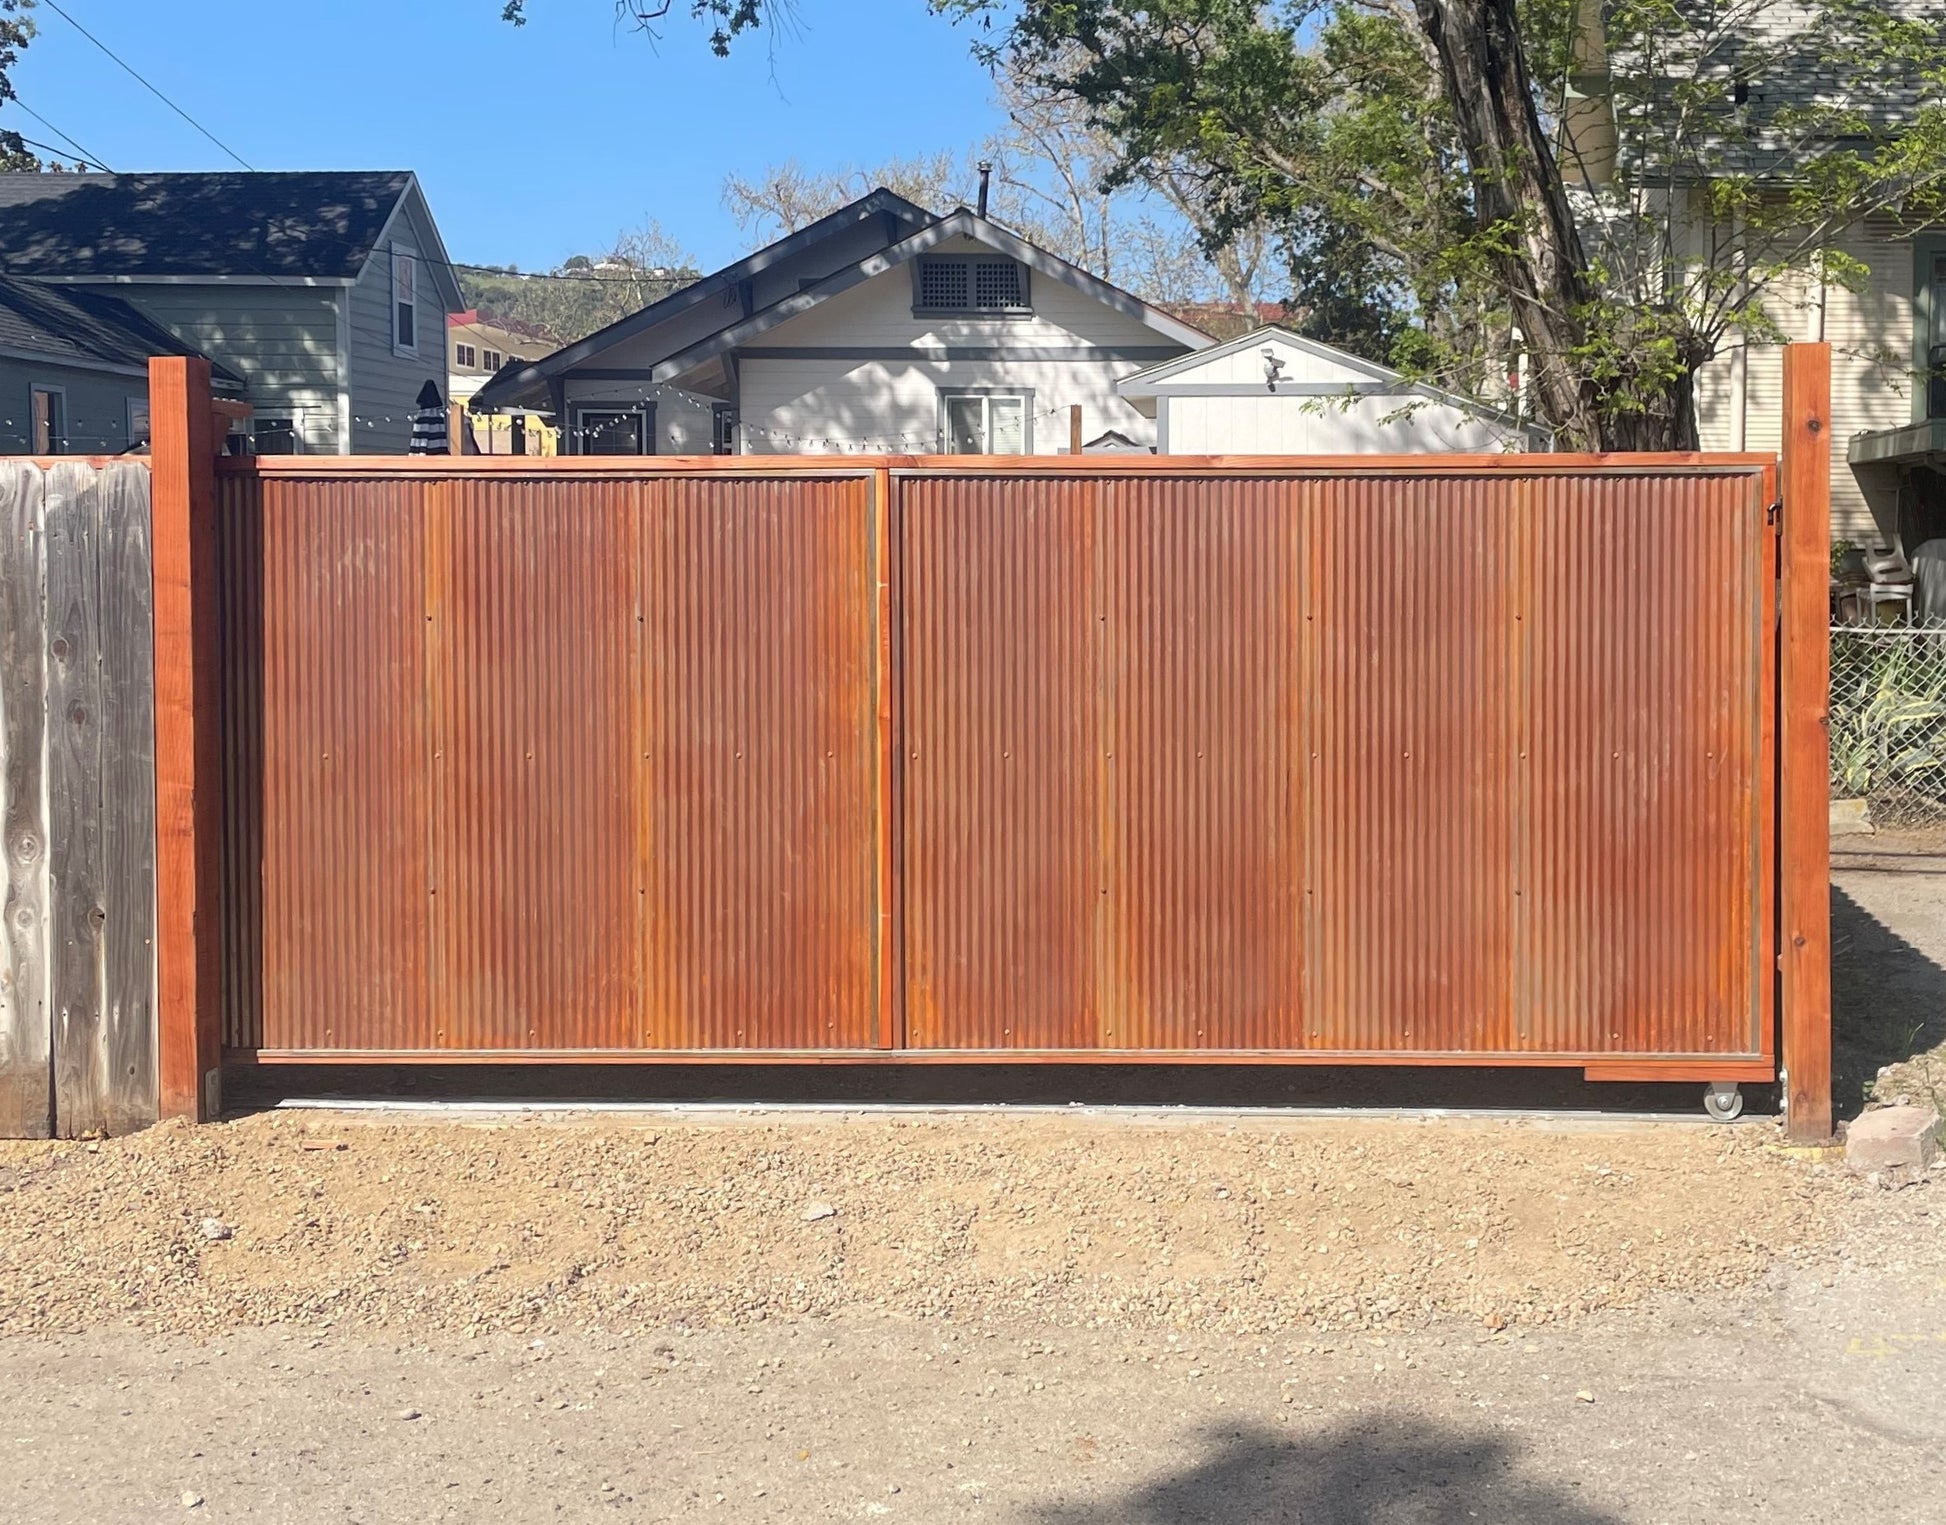 Rusty Corrugated Galvanized Tin Sheets | Website Home